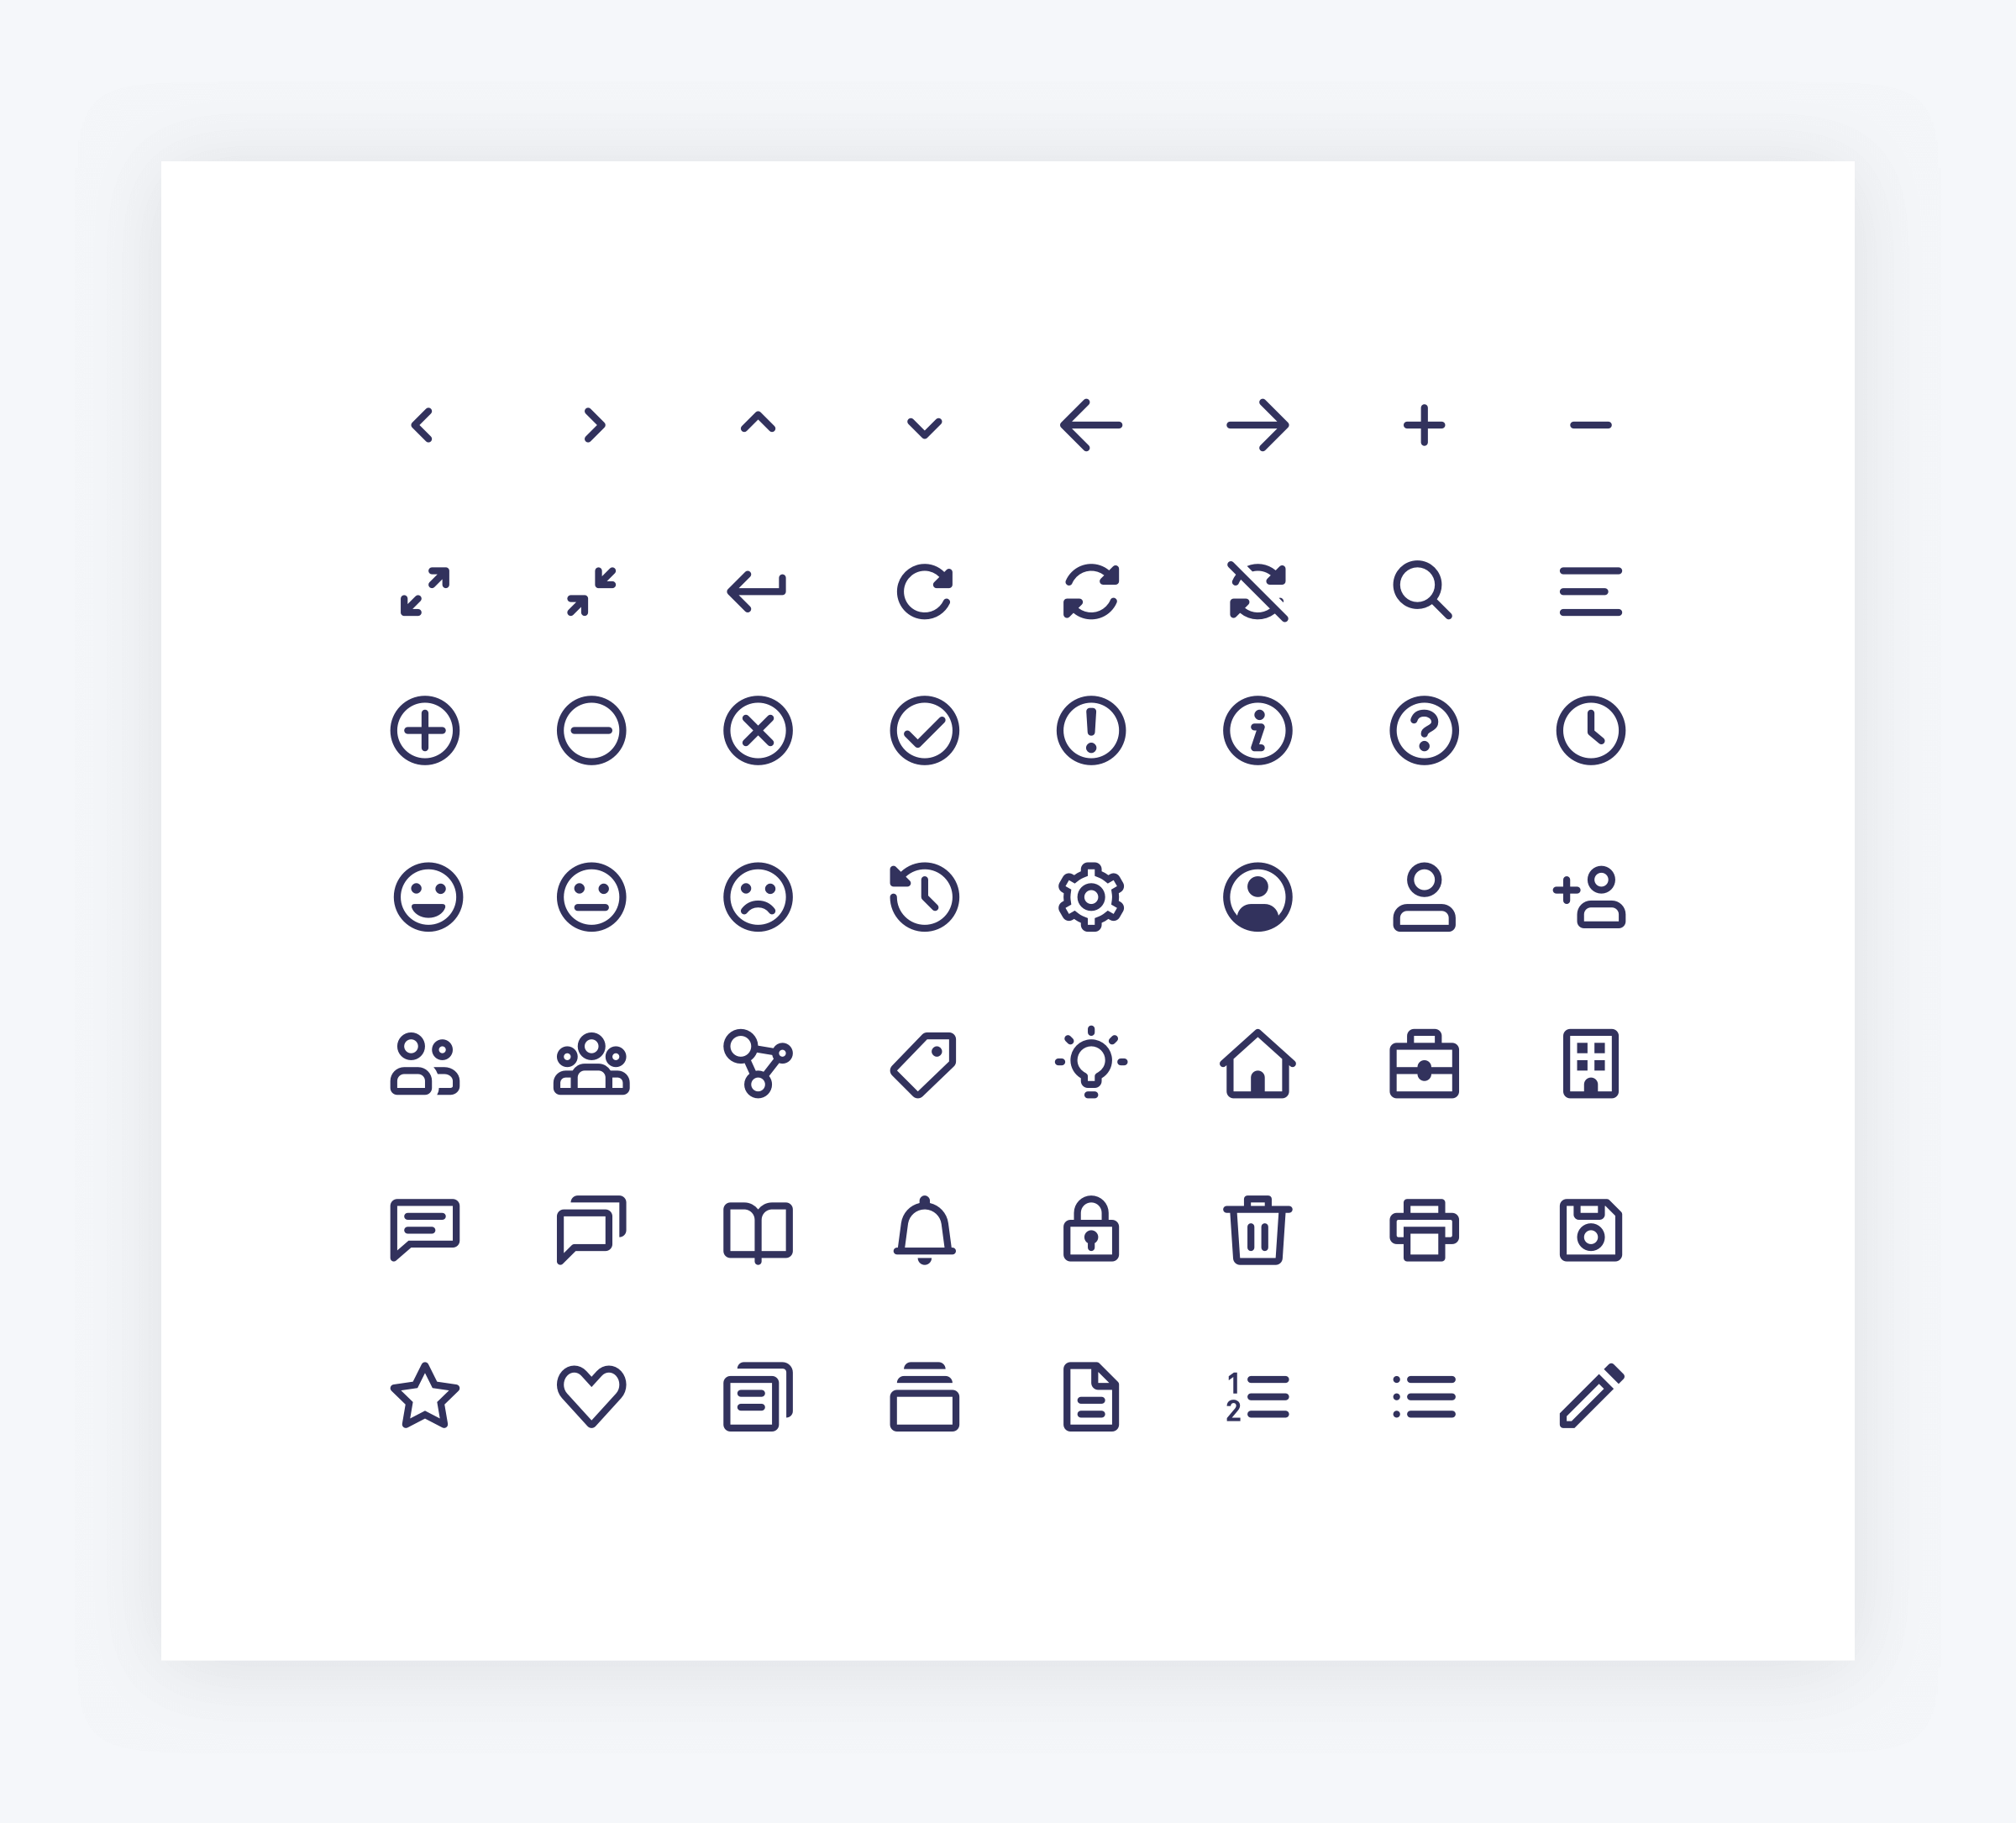 A selection of icons from our system